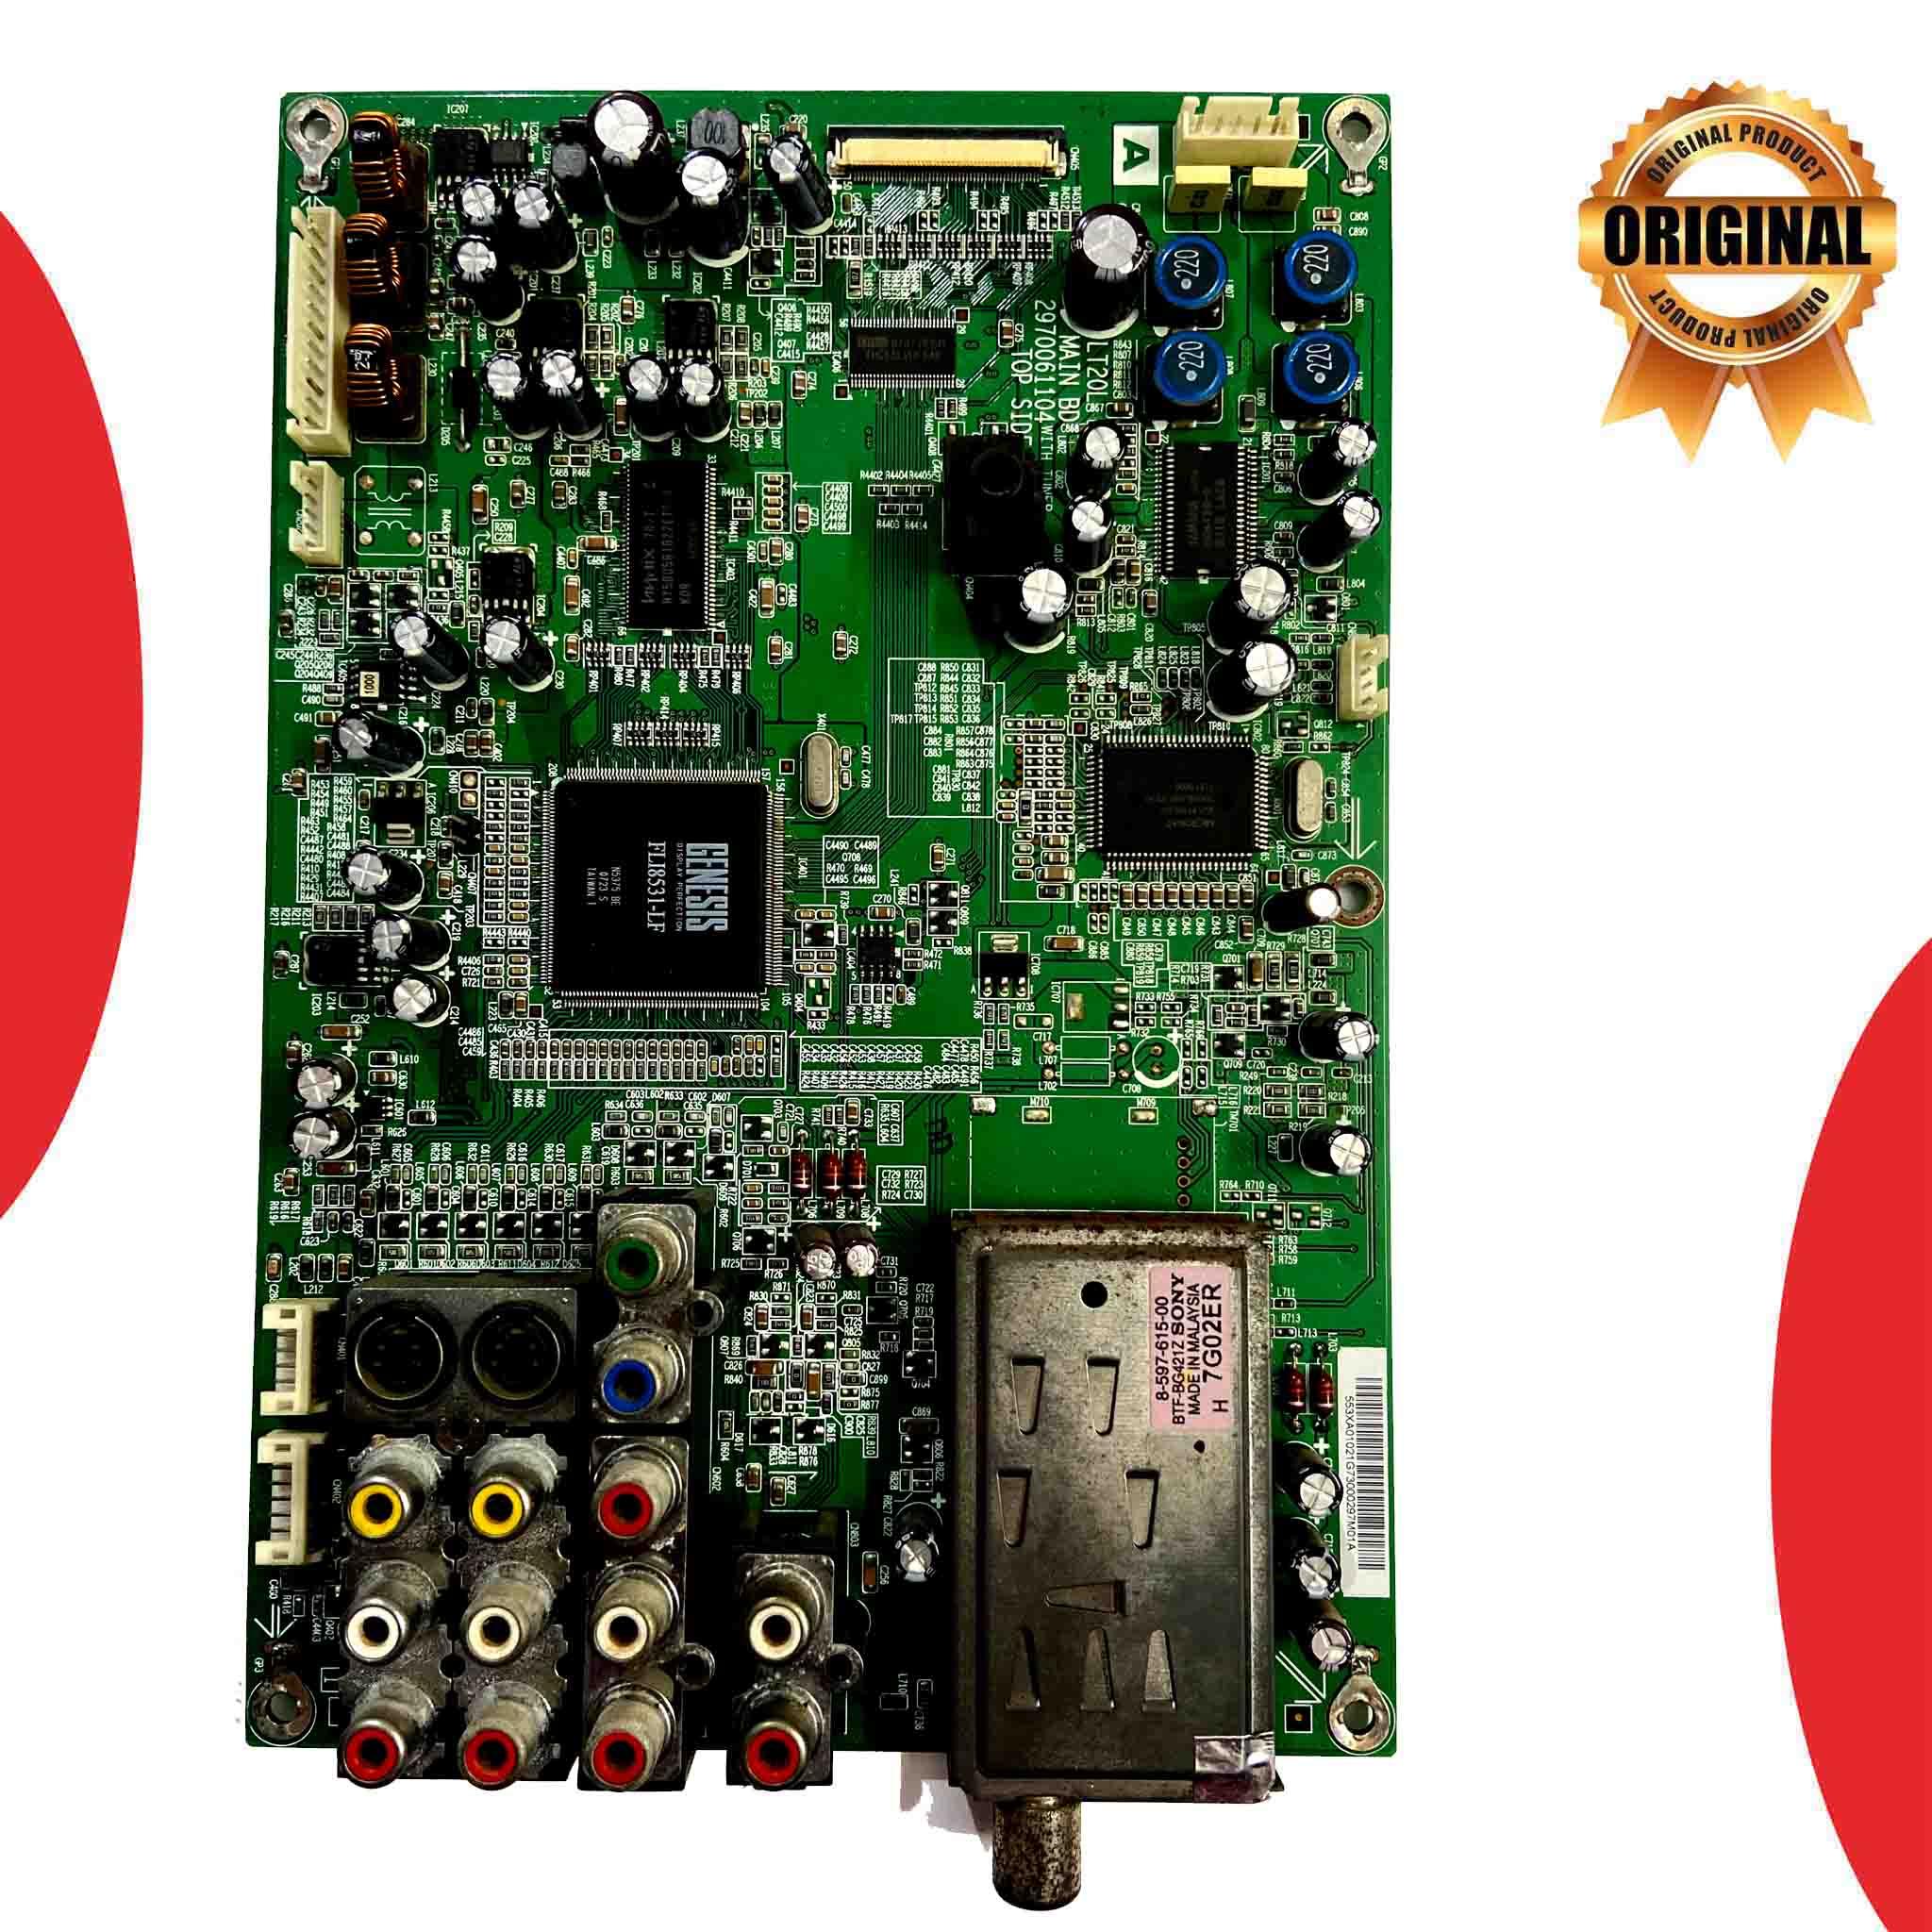 Model 20G300A Sony LED TV Motherboard - Great Bharat Electronics